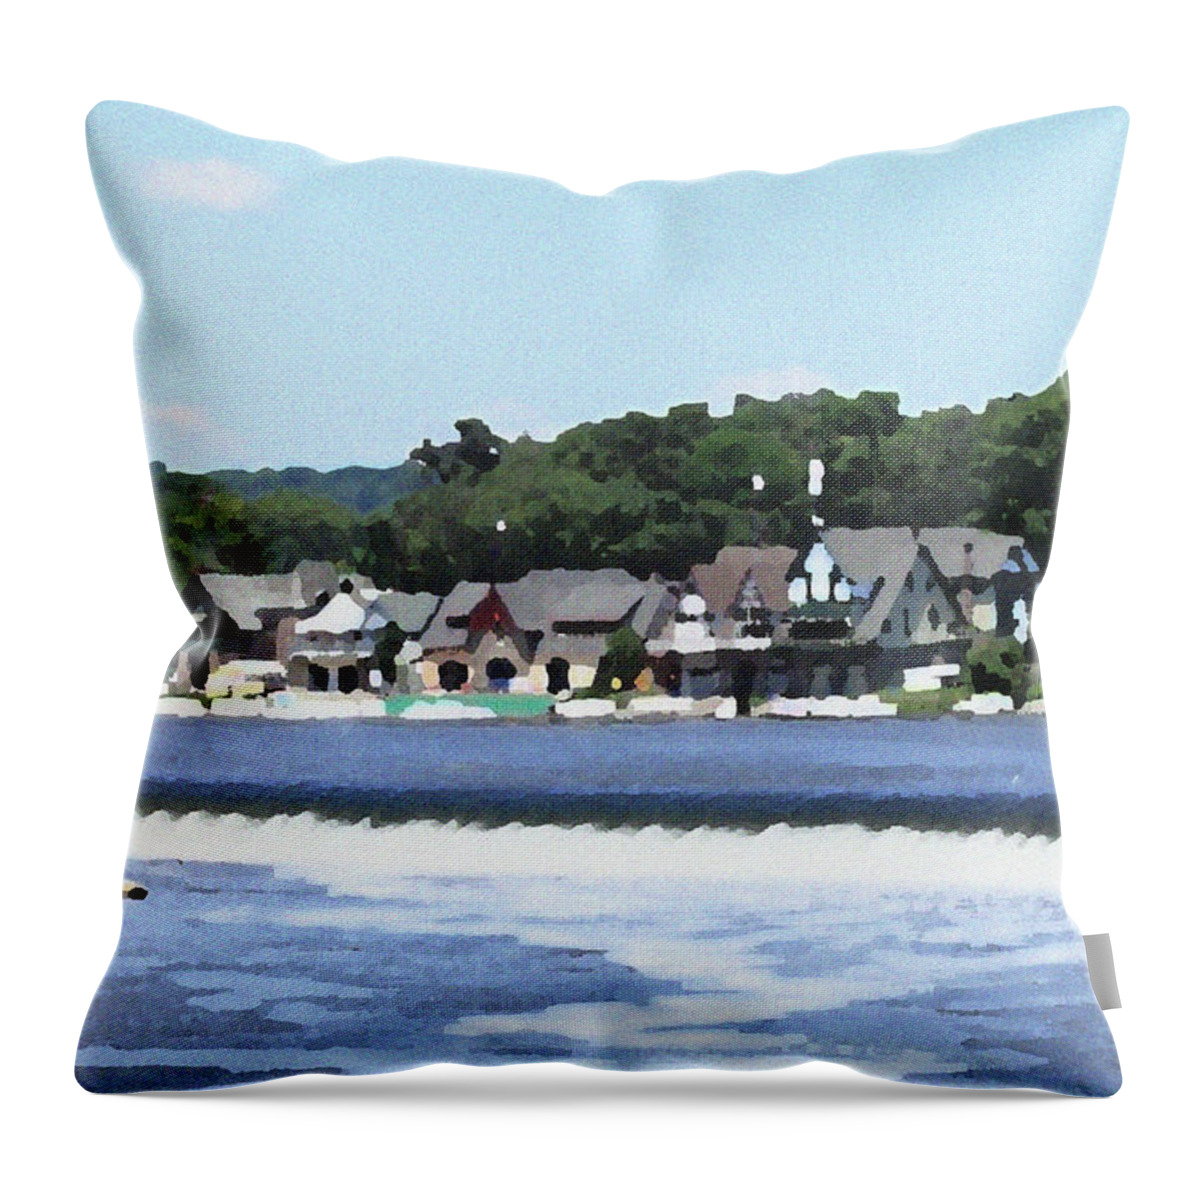 Boathouse Throw Pillow featuring the photograph Boathouse Row 2 - Palette Knife by Lou Ford